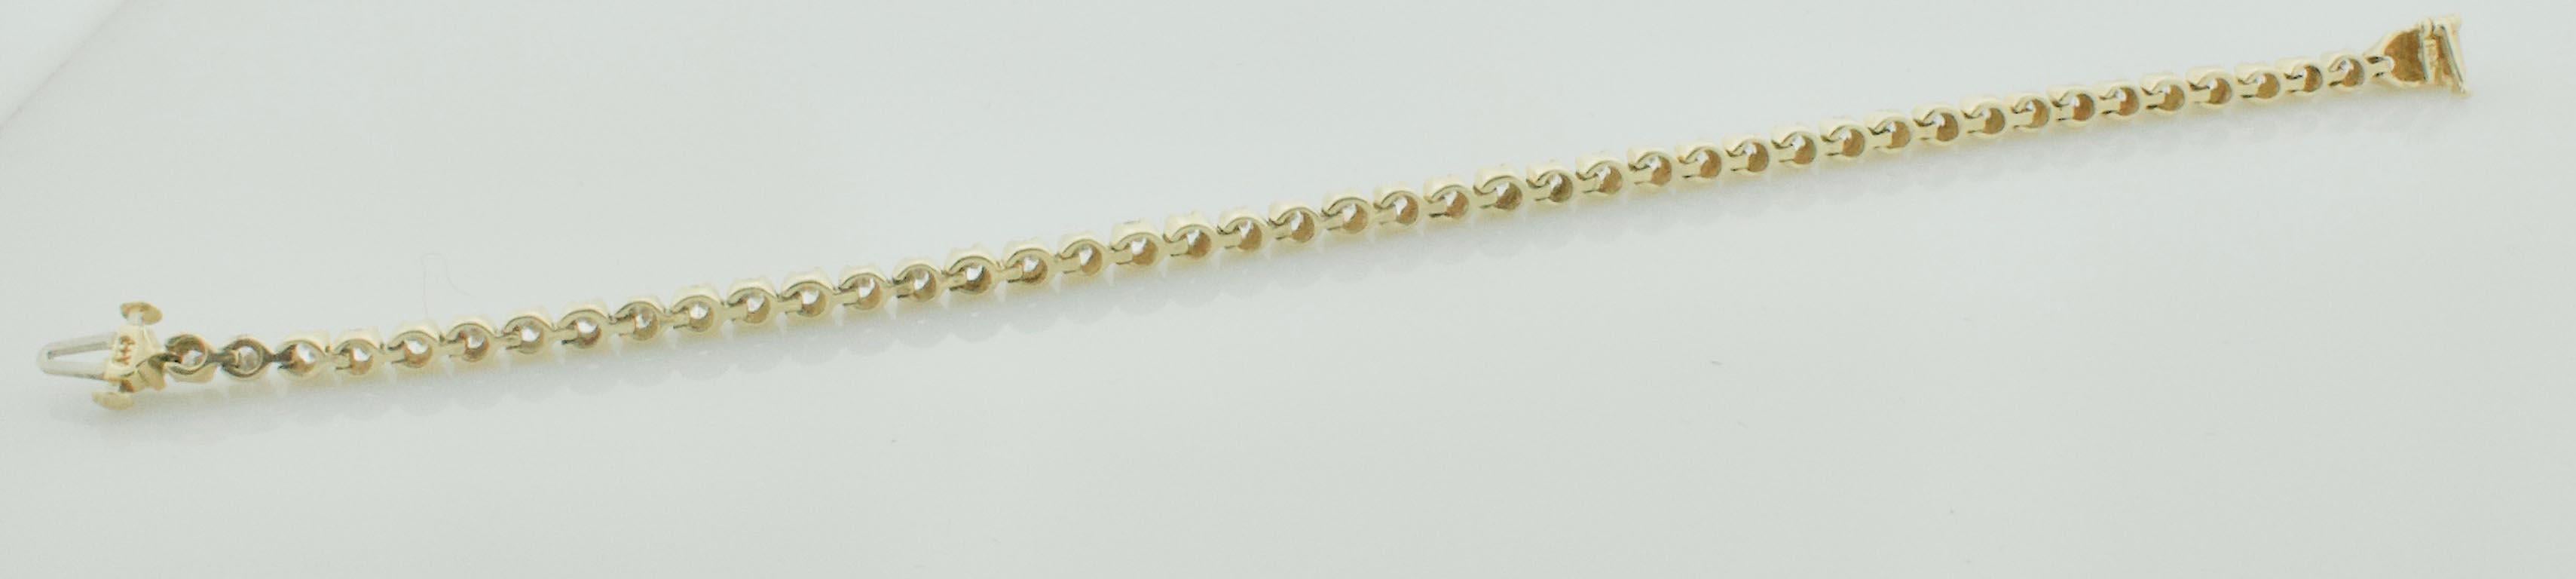 Women's or Men's The Classic Diamond Tennis Bracelet in Yellow Gold 2.75 Carats For Sale